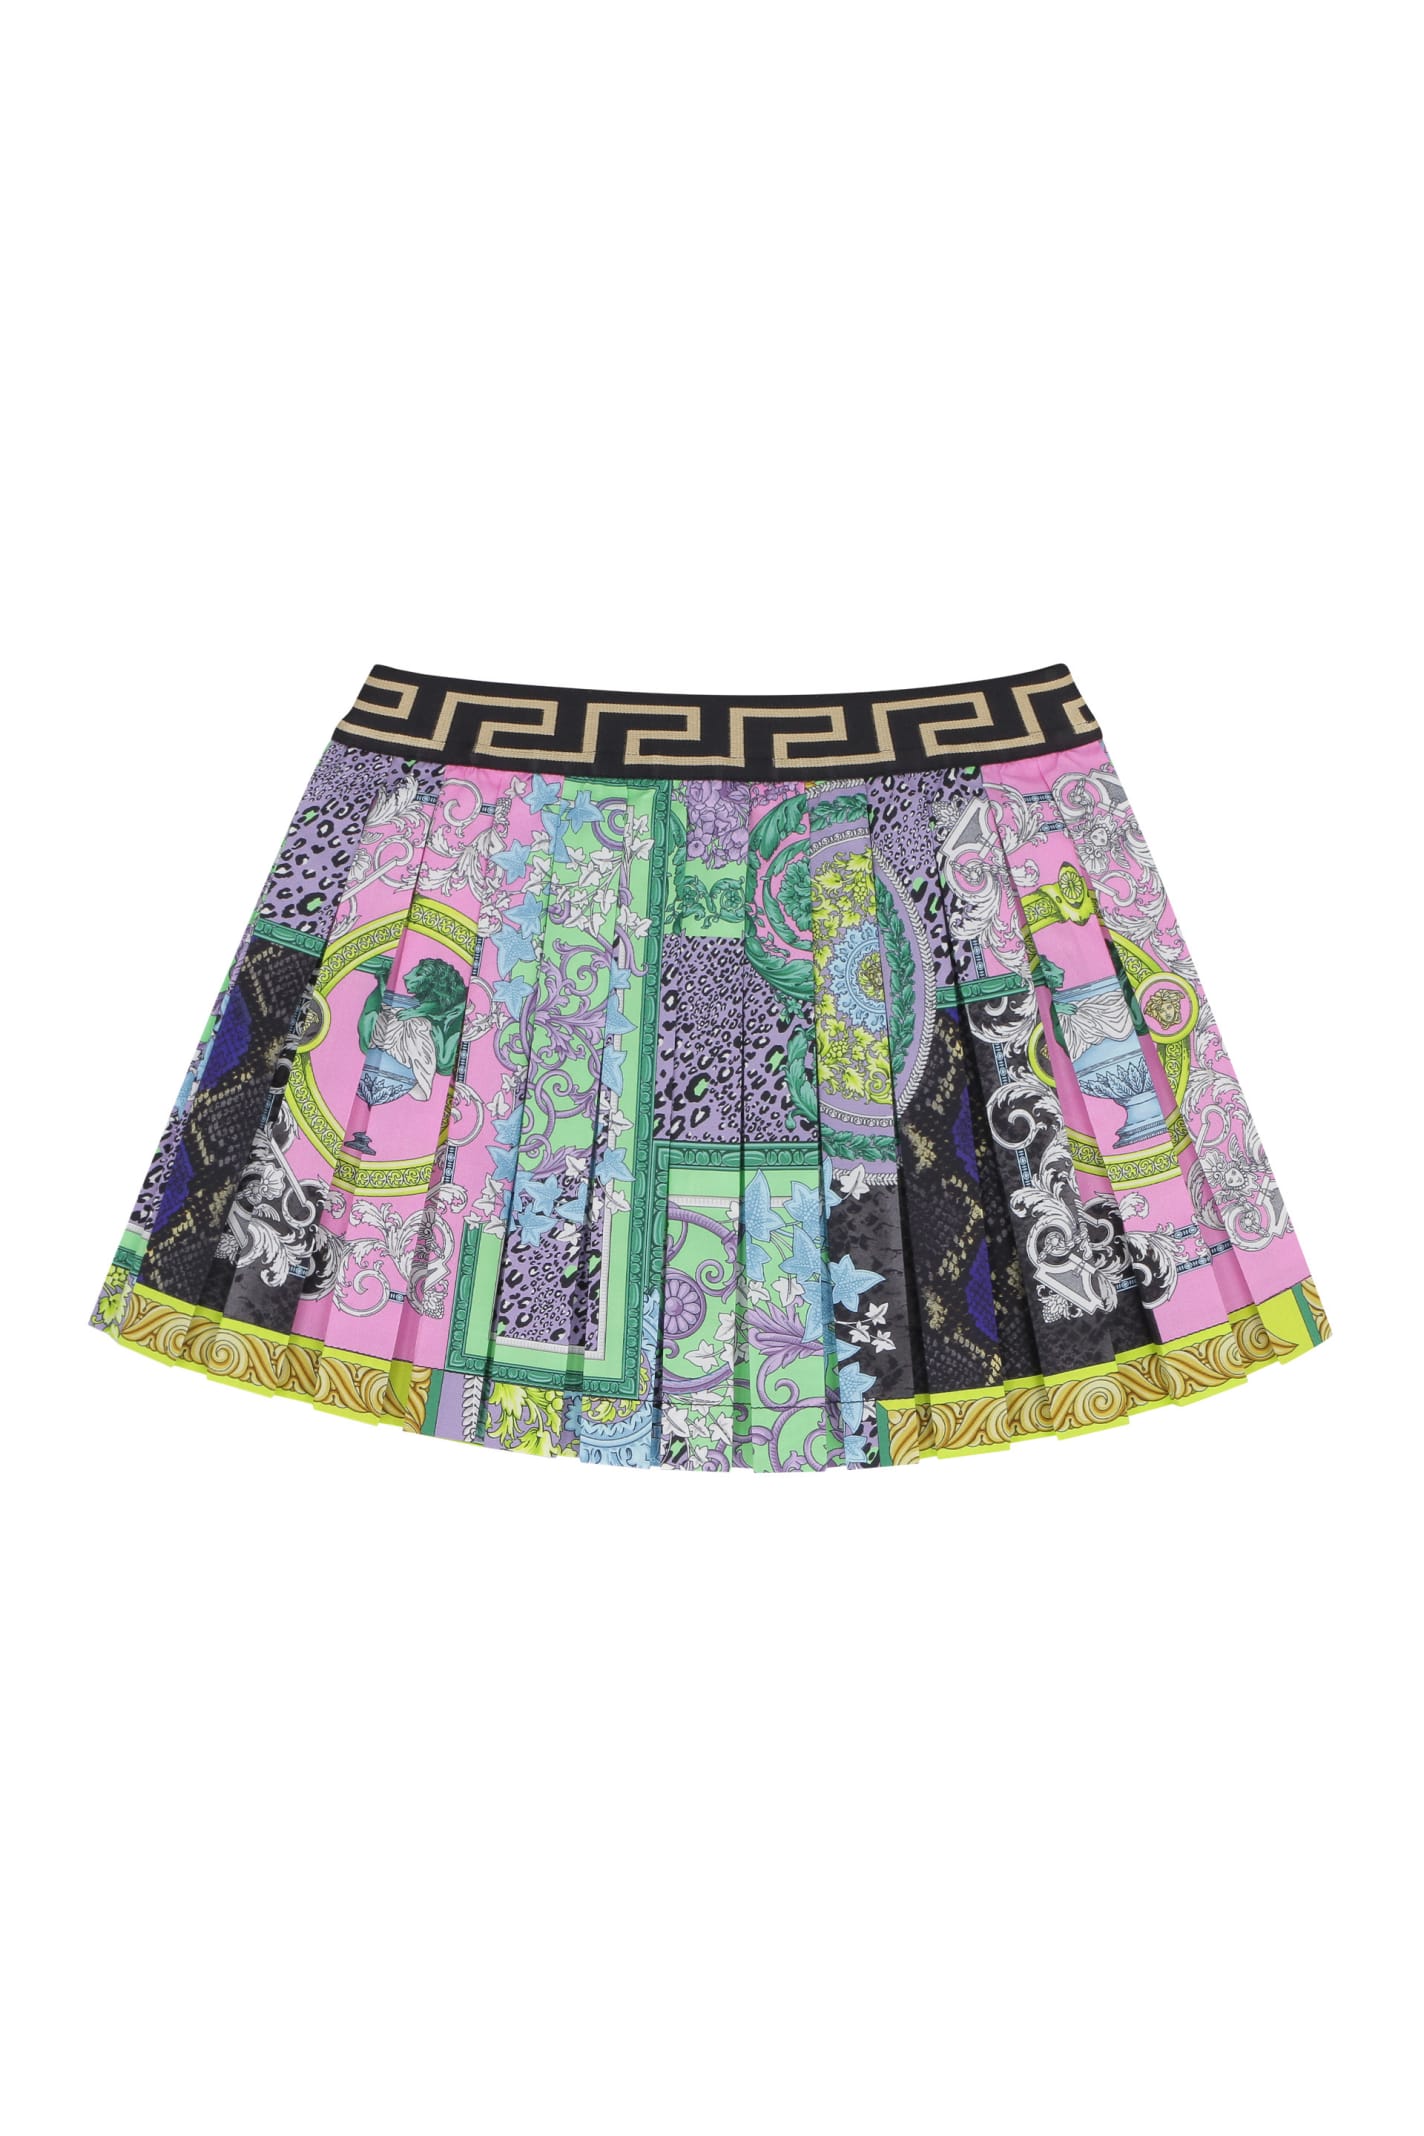 Young Versace Printed Pleated Skirt